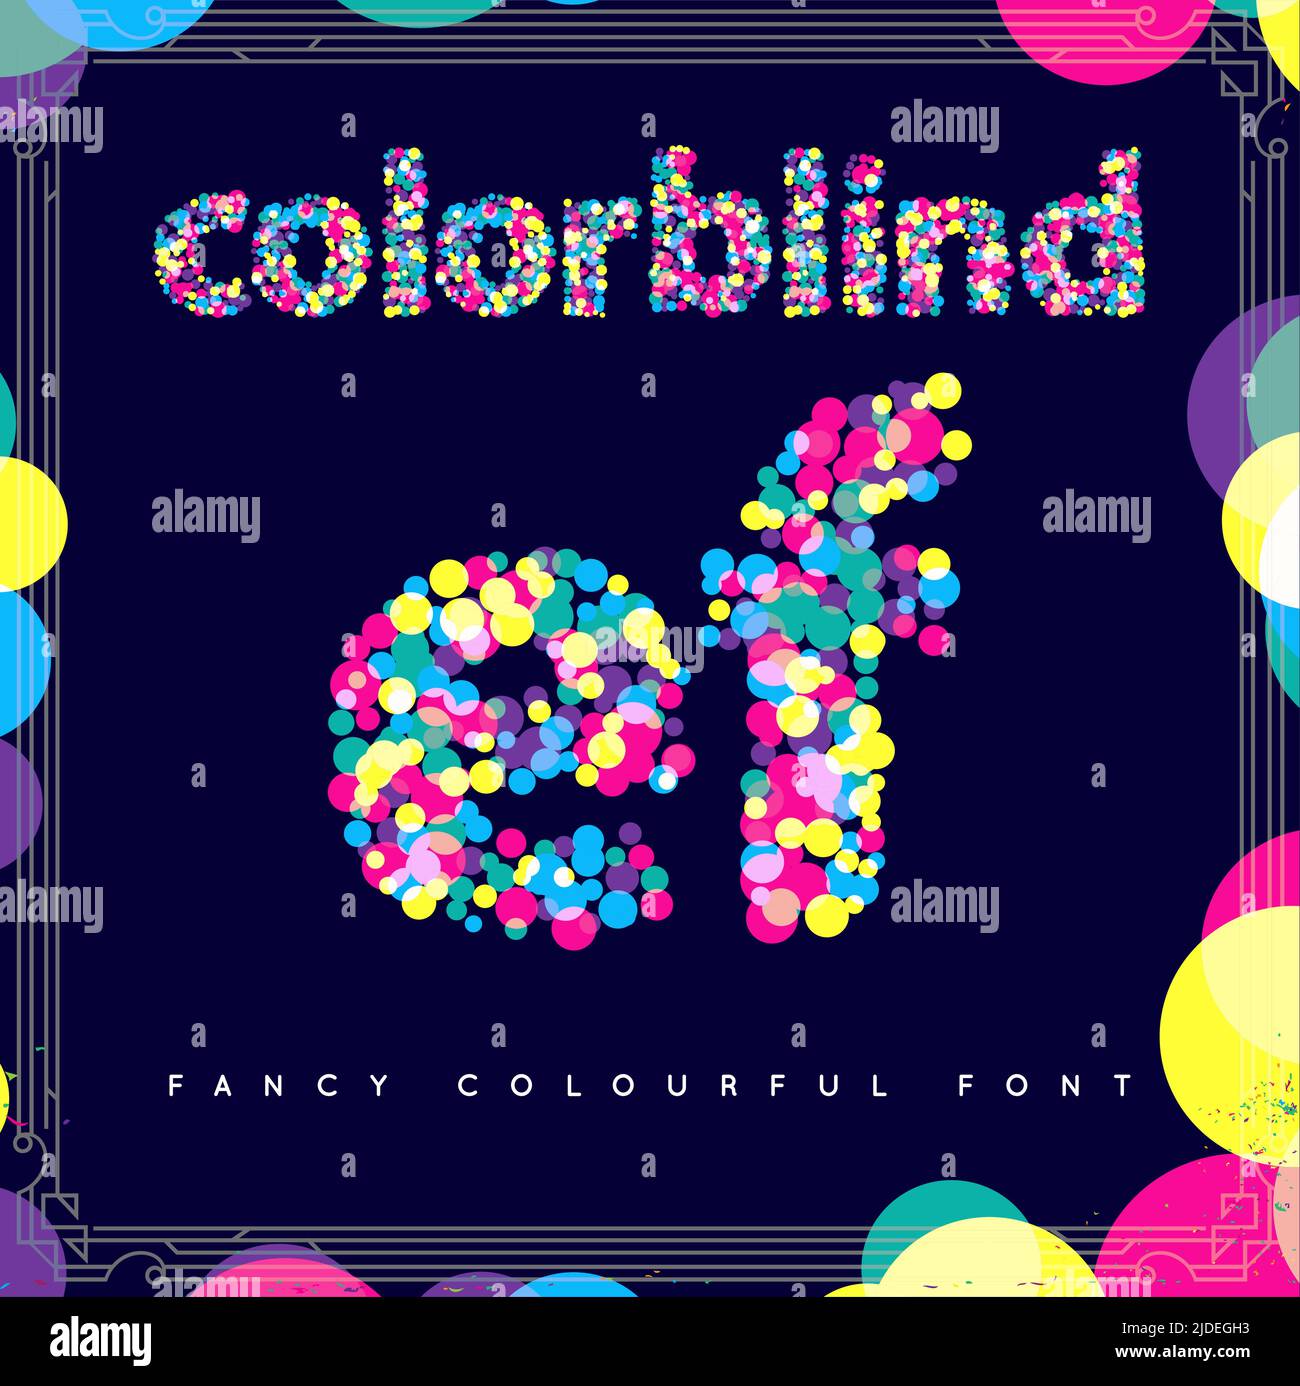 Set of Colorblind Style Font in Vector. Fresh trendy colors. Stock Vector